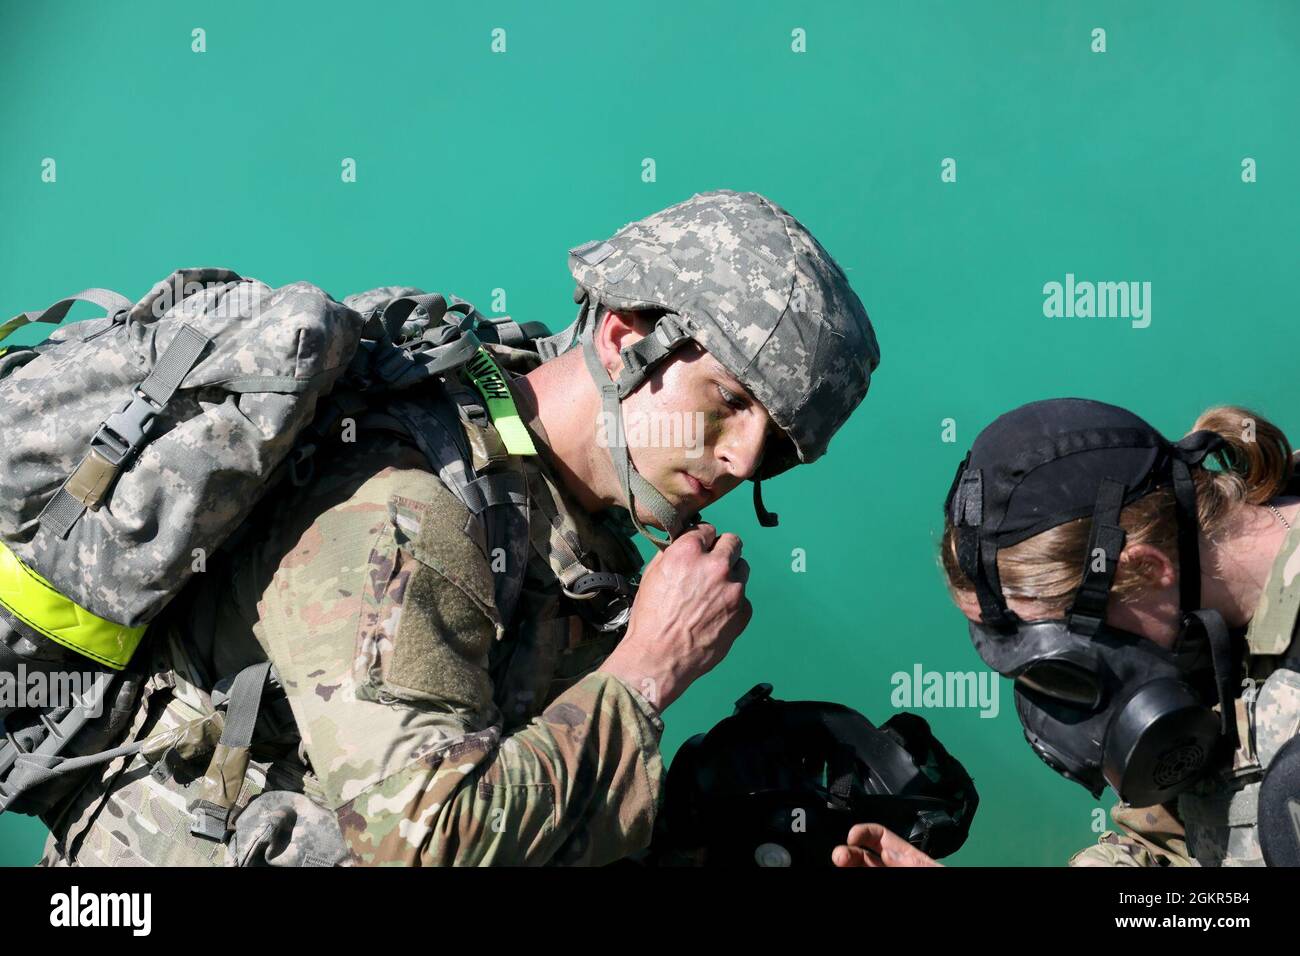 Spc. Colin Hoffmann, left, unsnaps his helmet as Capt. Laura Benz gets ready to assist, during a simulated gas attack, Regional Health Command-Pacific Best Leader Competition, Joint Base Lewis-McChord, Wash., June 17, 2021. Both are assigned to U.S> Army Medical Department Activity-Alaska. The Best Leader Competition promotes esprit de corps across the Army, while recognizing Soldiers who demonstrate the Army Values and embody the Warrior Ethos. The competition recognizes those Soldiers who possess superb military bearing and communication skills, in-depth knowledge of military subjects, and t Stock Photo